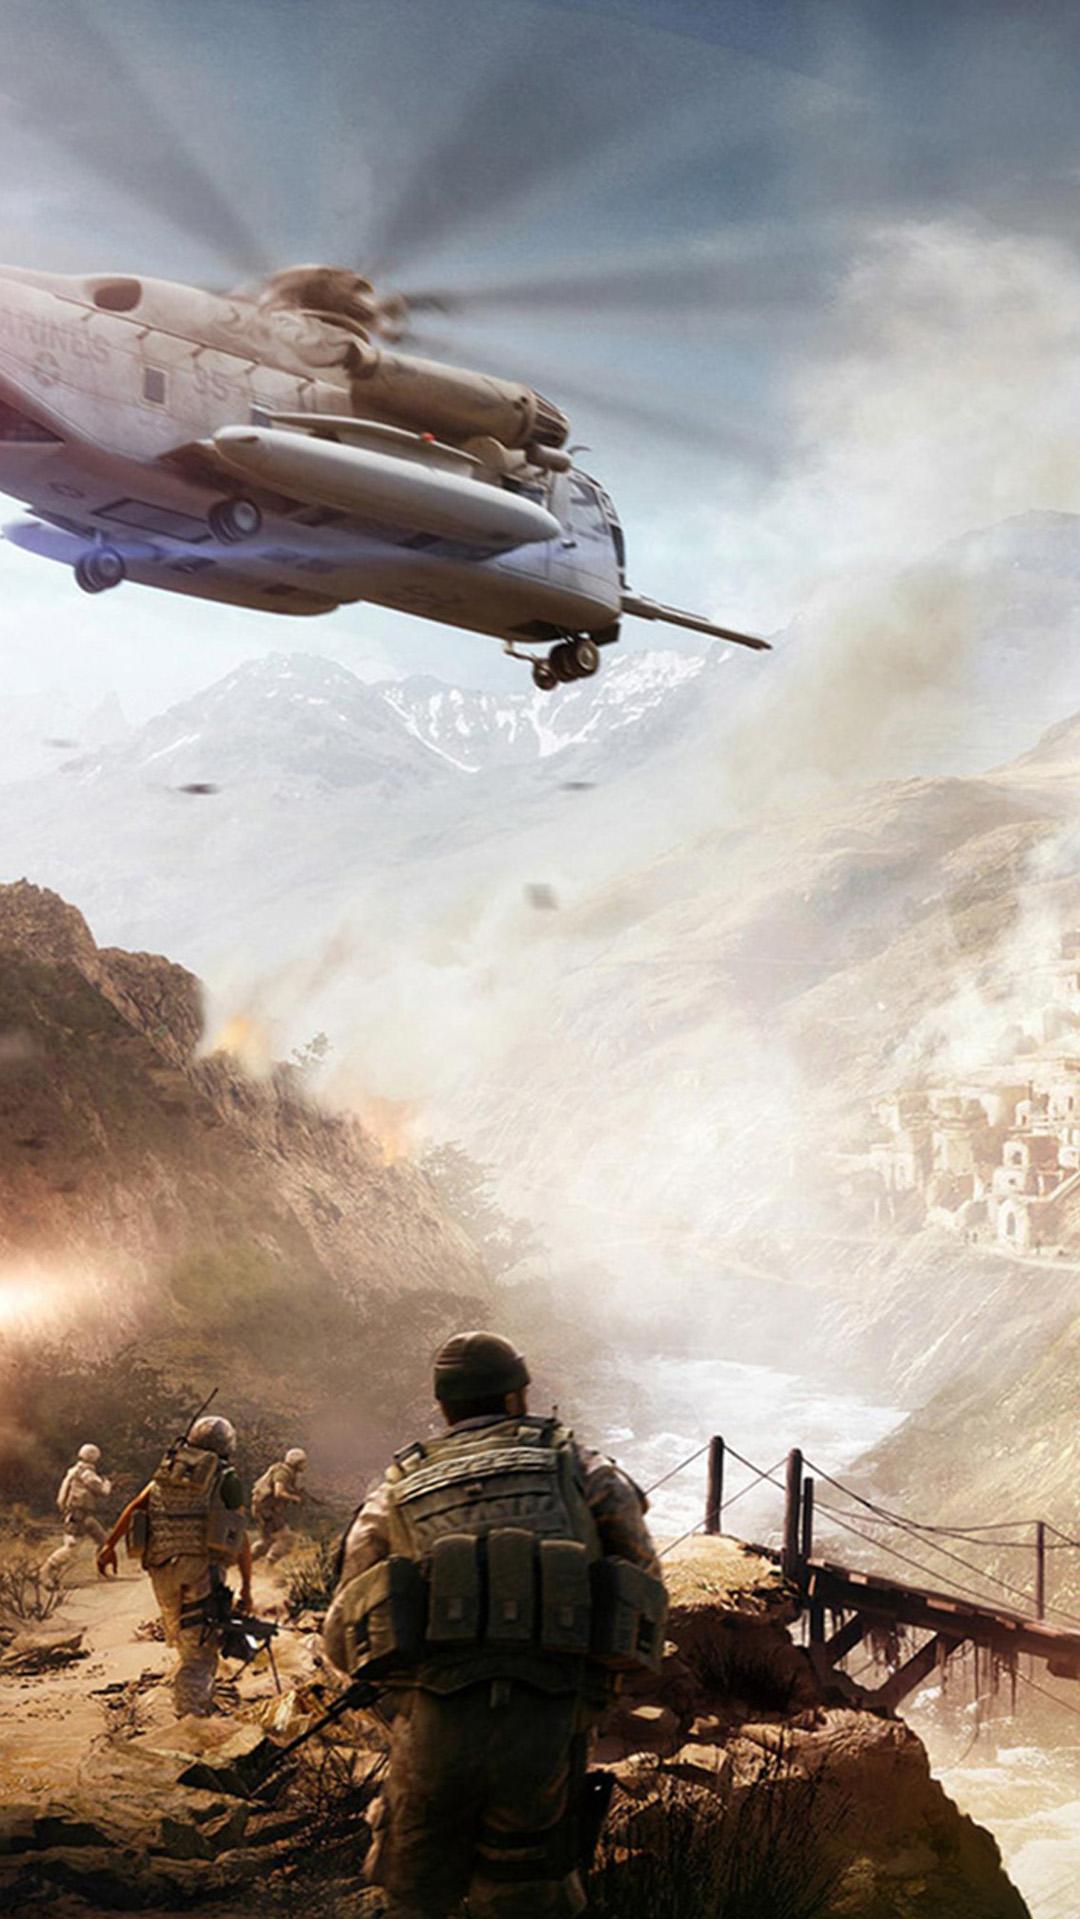 Free download Military Iphone Wallpaper Cool War Games photos Cool